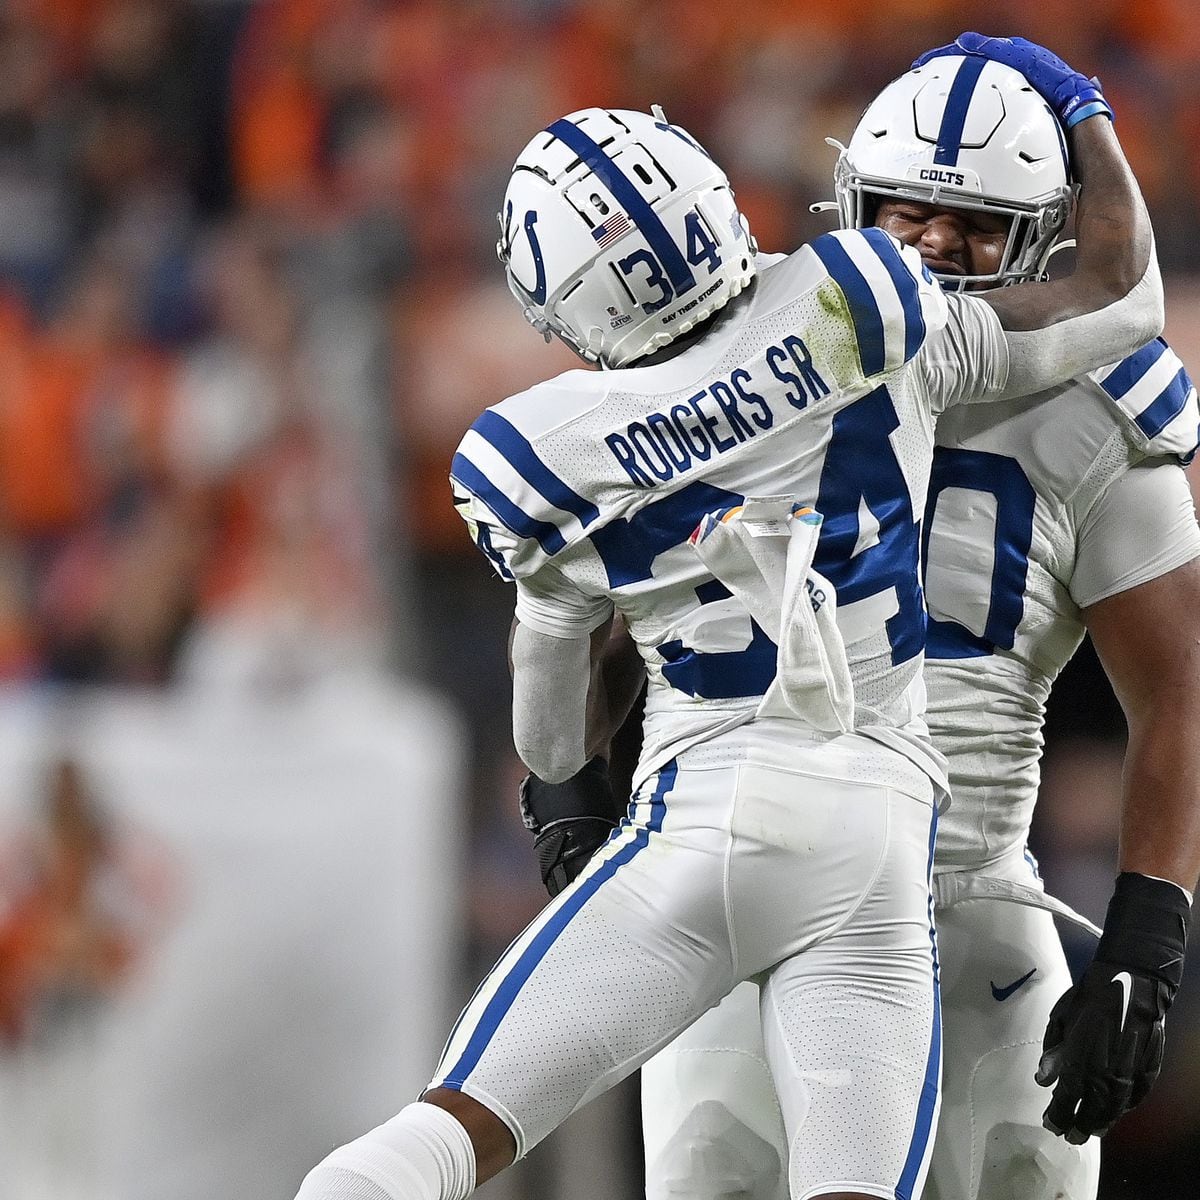 Who Will Win Thursday Night Football? Prediction for Broncos vs. Colts